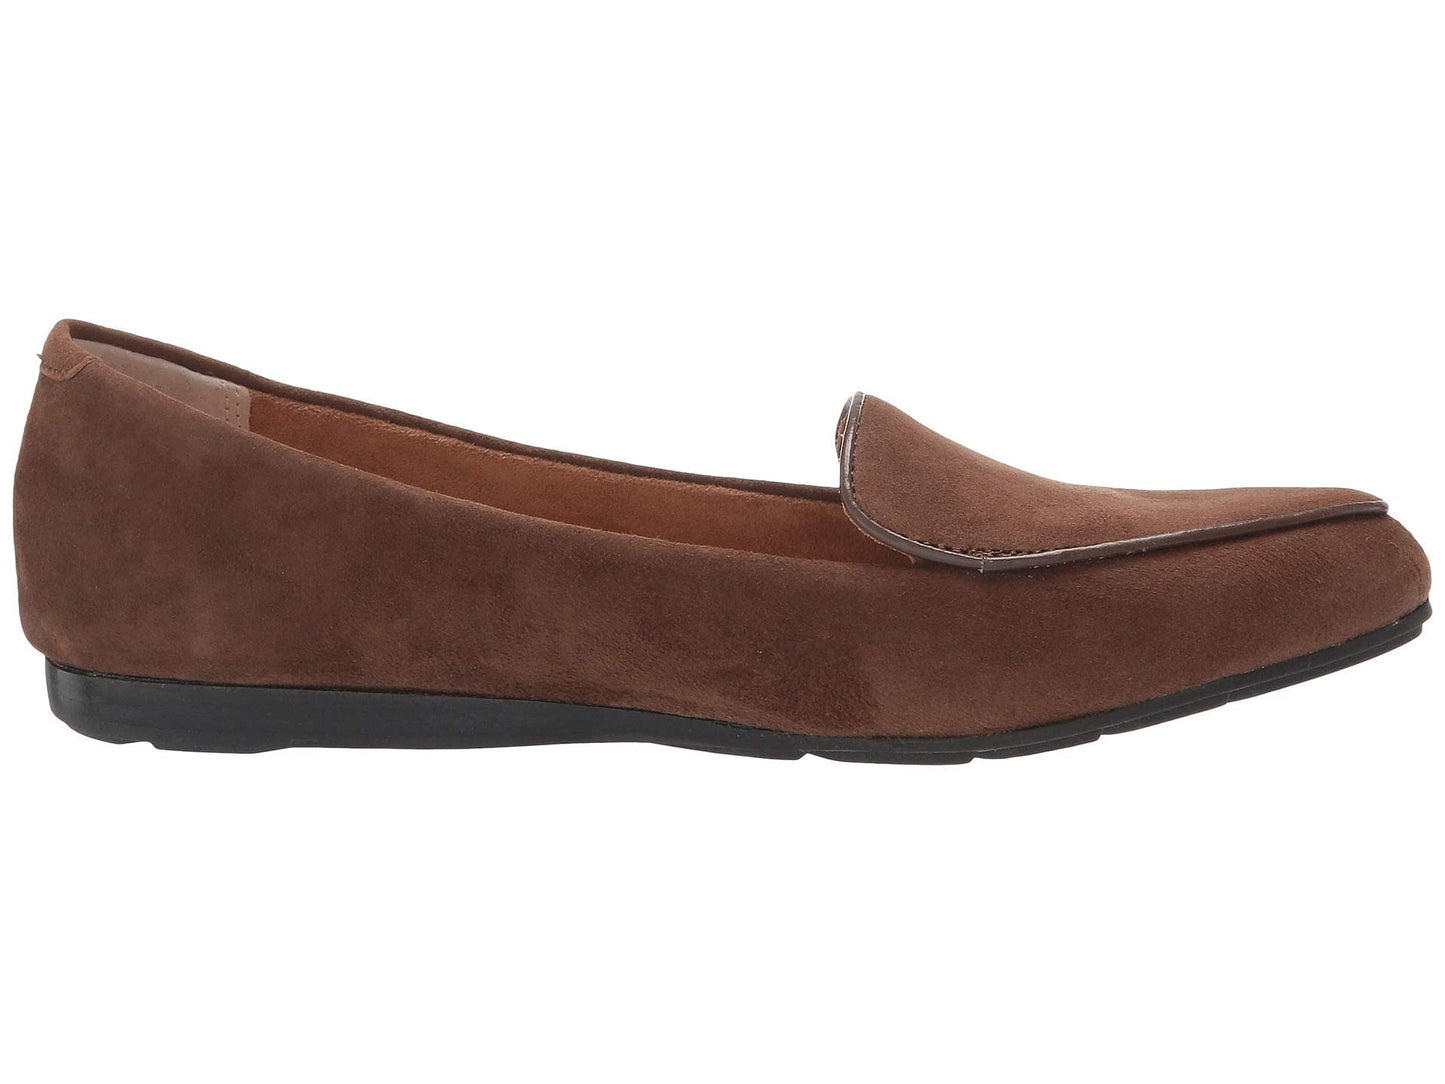 Anissa Sliver Vintage Brown Suede Me Too Wedge Loafers